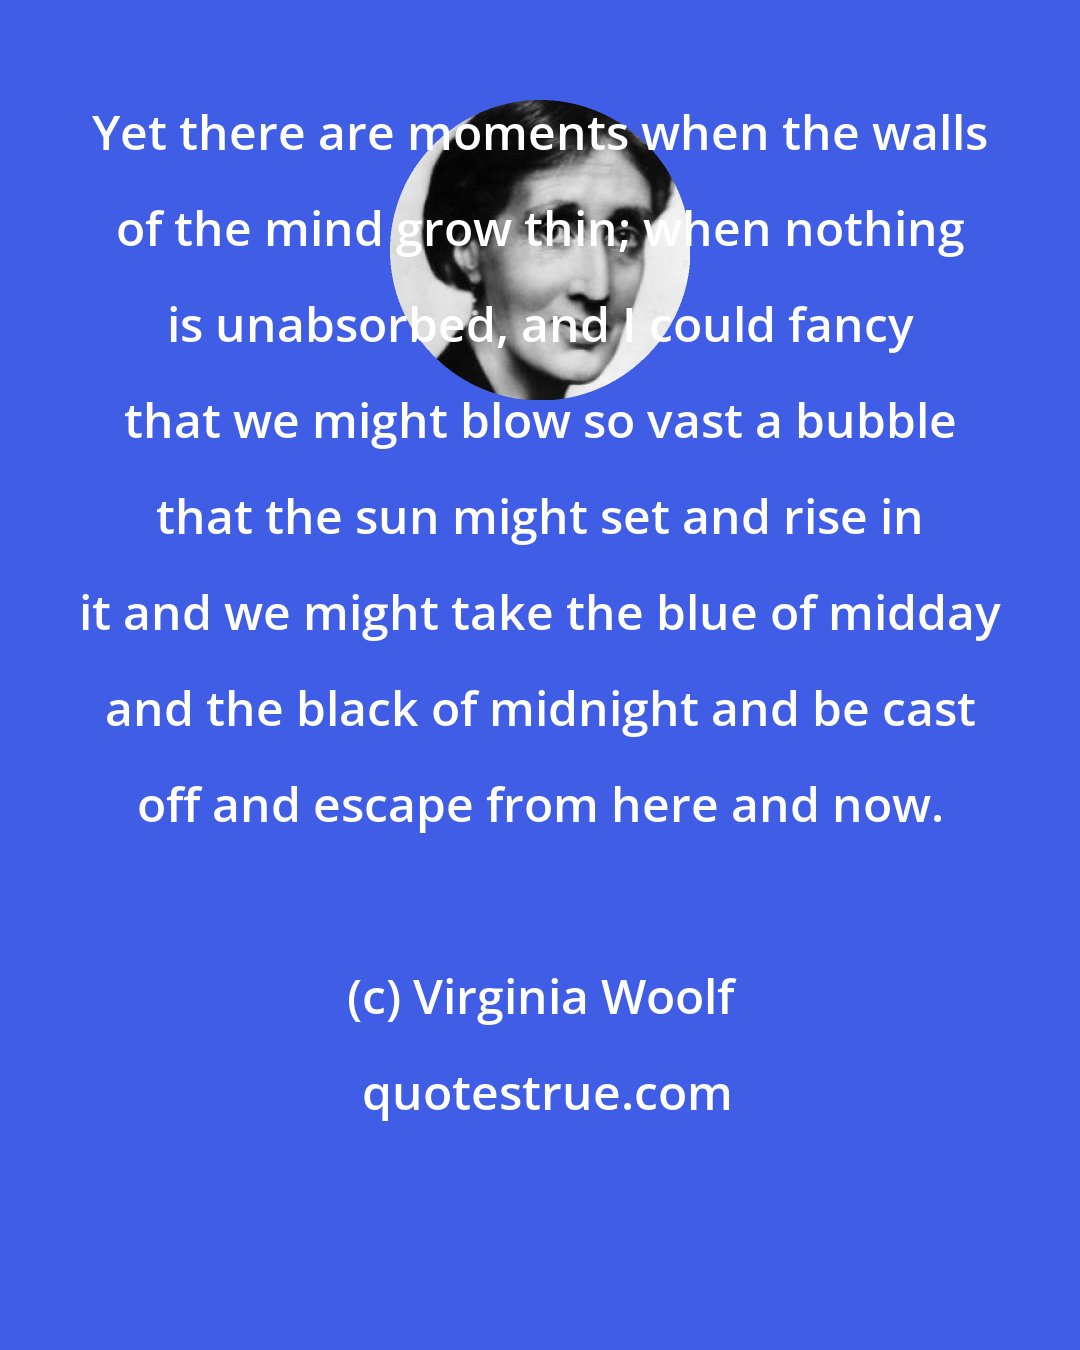 Virginia Woolf: Yet there are moments when the walls of the mind grow thin; when nothing is unabsorbed, and I could fancy that we might blow so vast a bubble that the sun might set and rise in it and we might take the blue of midday and the black of midnight and be cast off and escape from here and now.